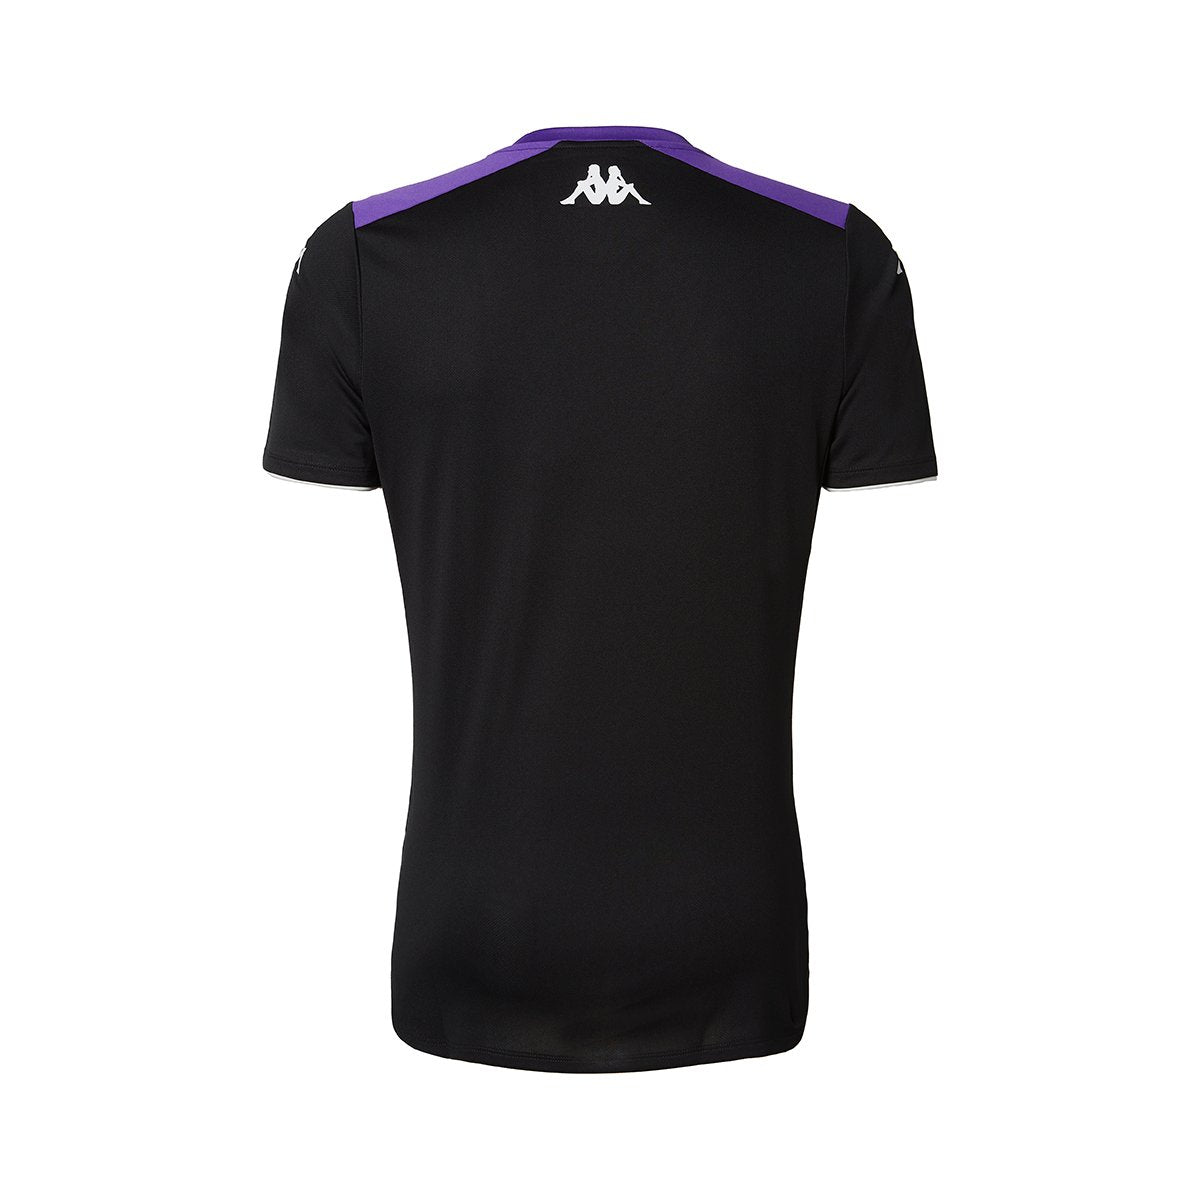 Camiseta Abou Pro 5 Rugby World Cup niño Negro - Imagen 2